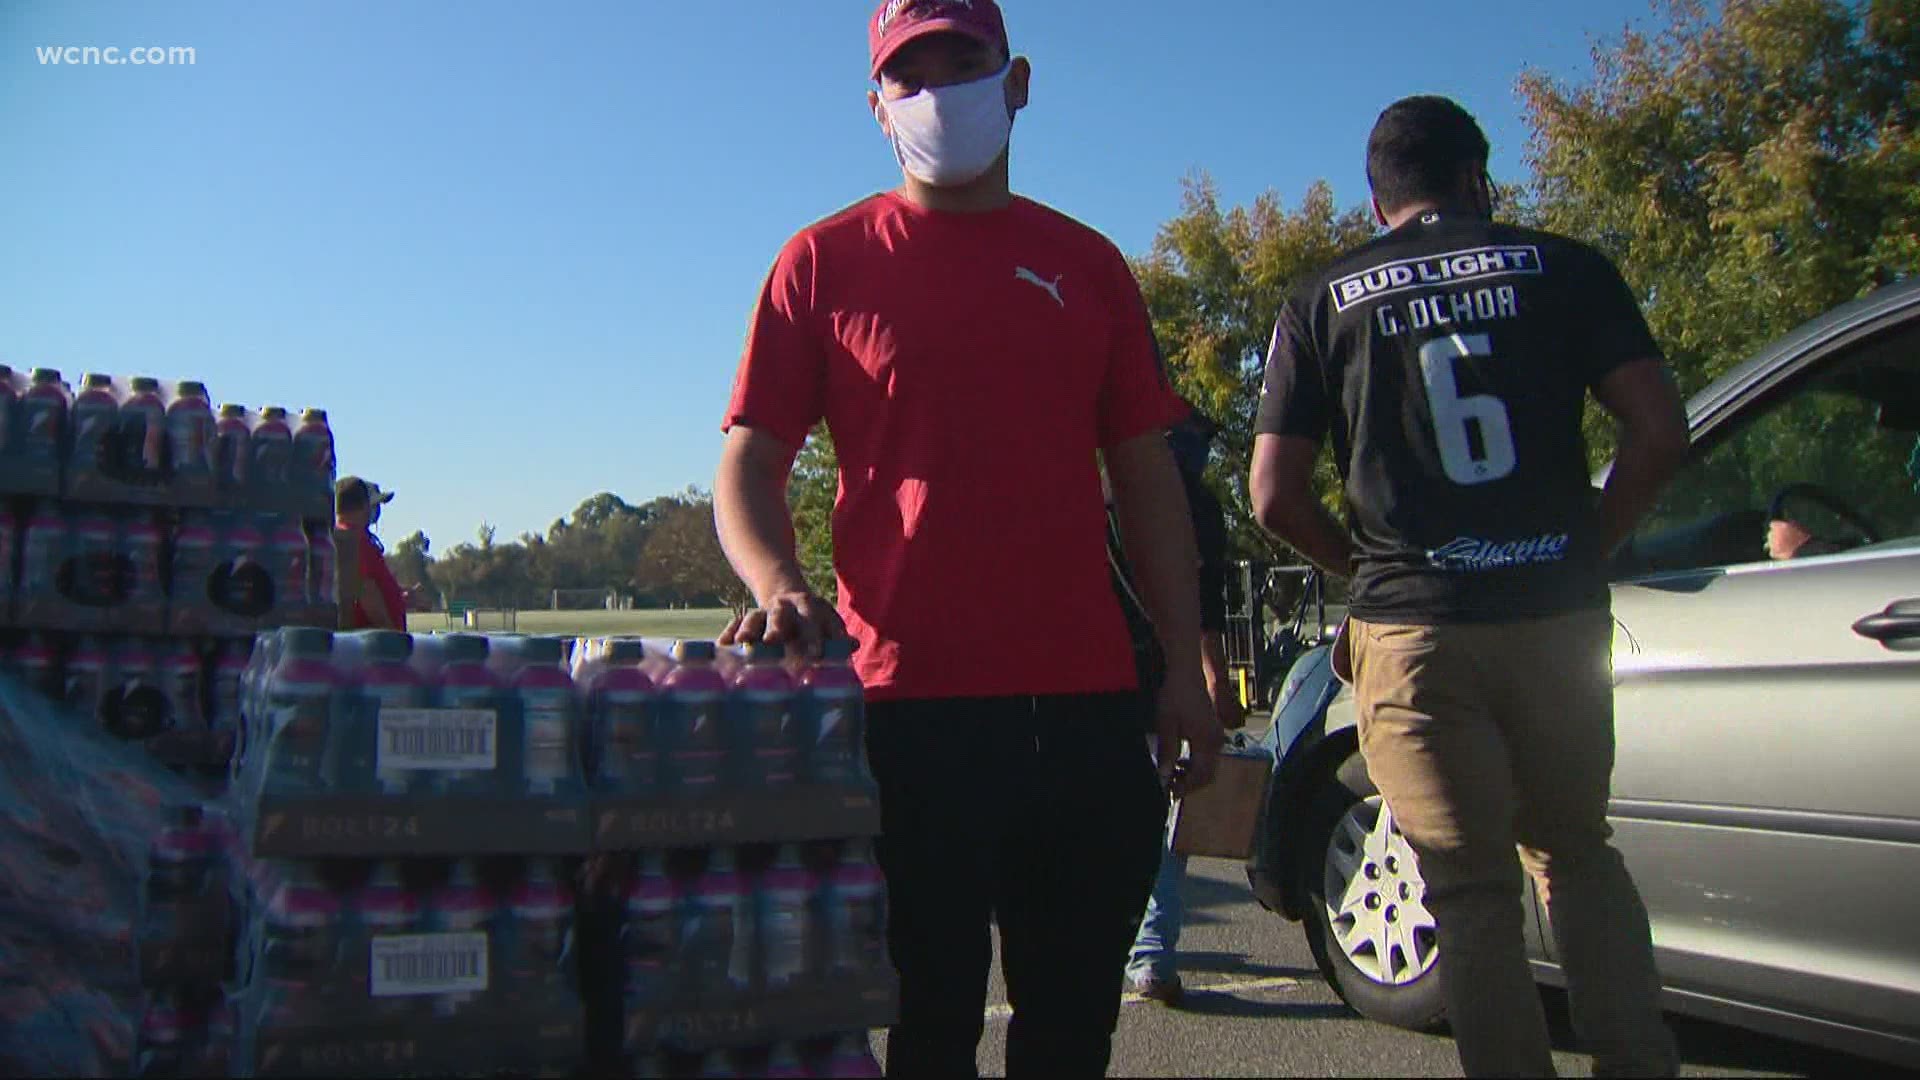 More than 2,000 nutritional food boxes were given out at the drive-through event on Nations Ford Road.